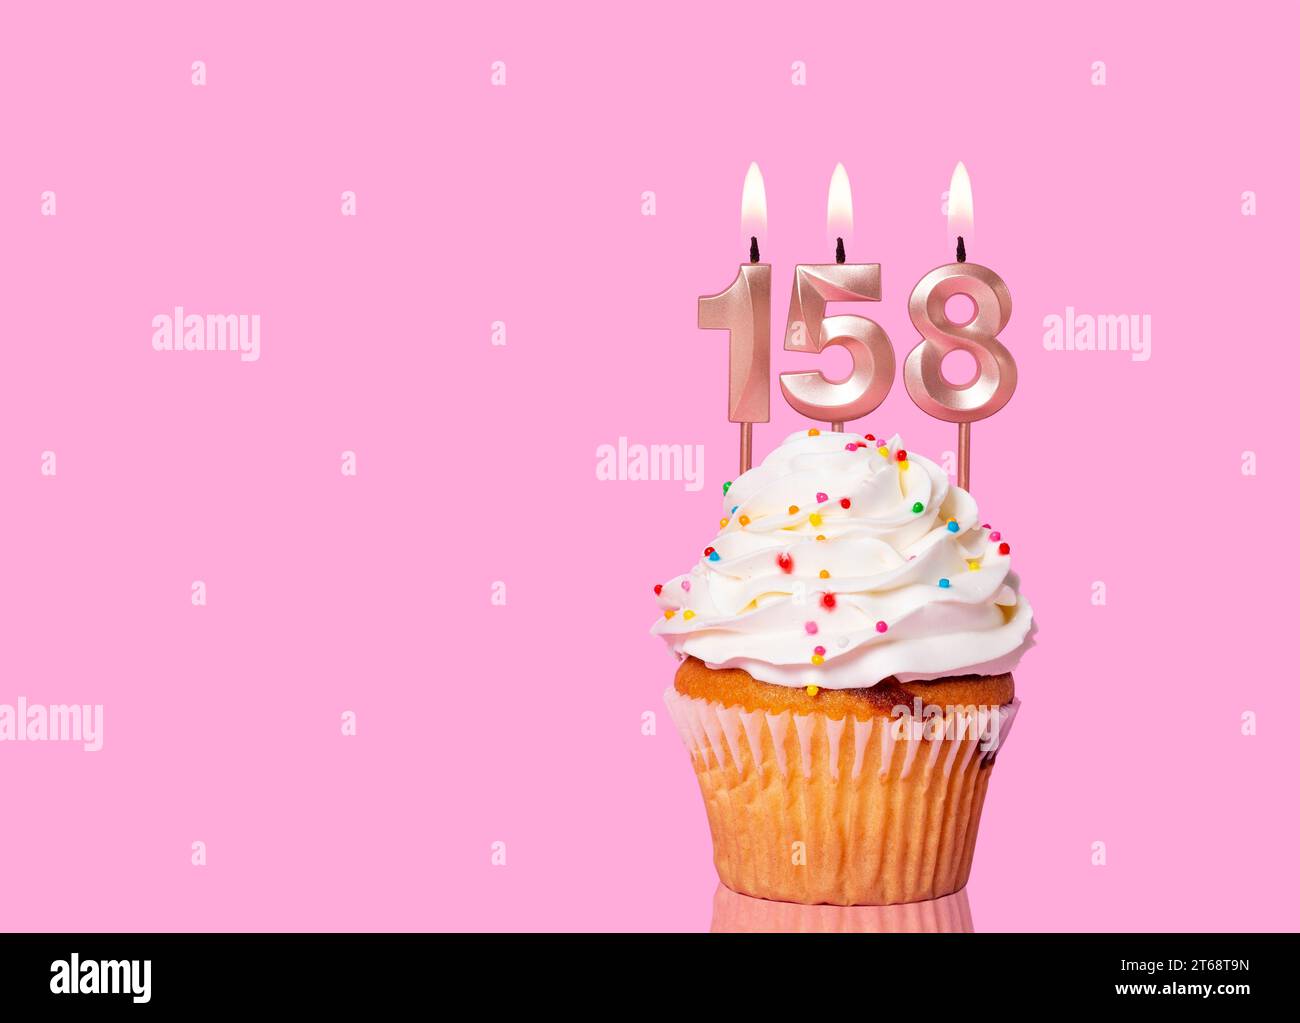 Birthday Cake With Candle Number 158 - On Pink Background. Stock Photo